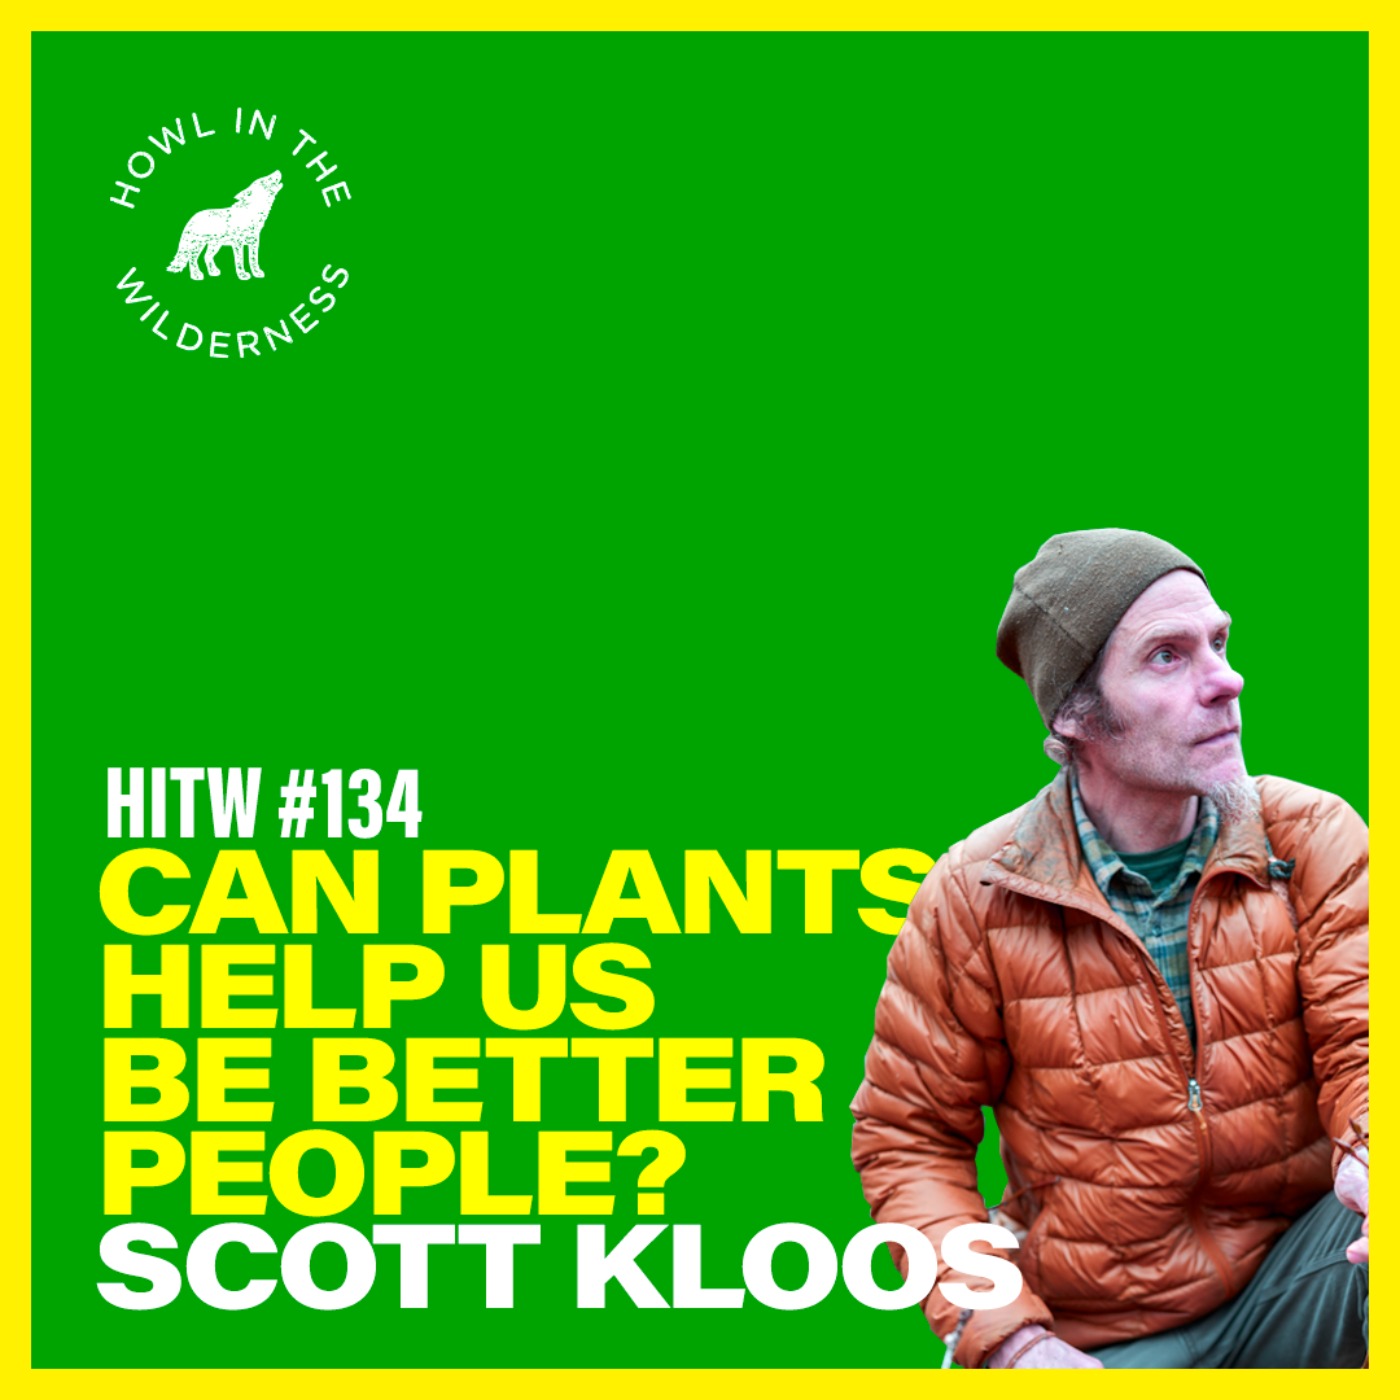 Can plants teach us to be better people? | Scott Kloos | HITW 134